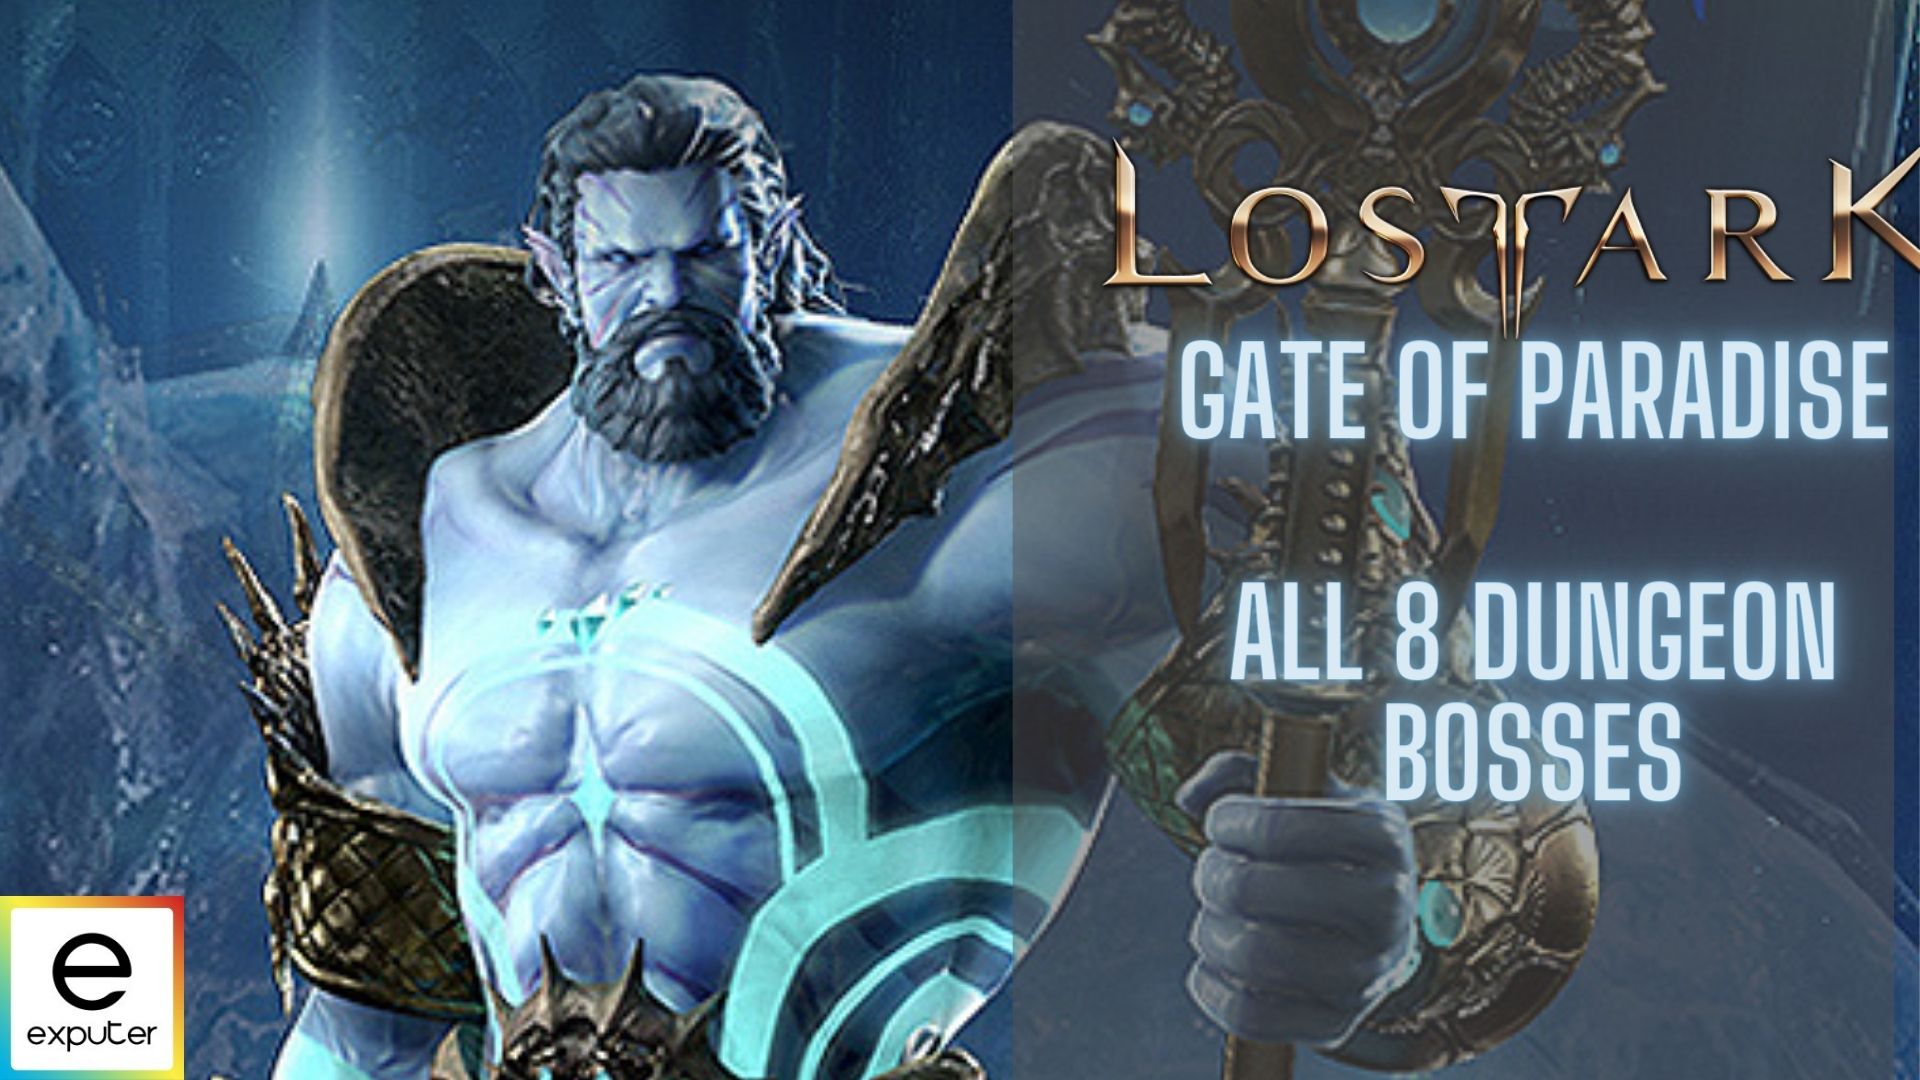 Dungeon Bosses Lost Ark Gate of Paradise